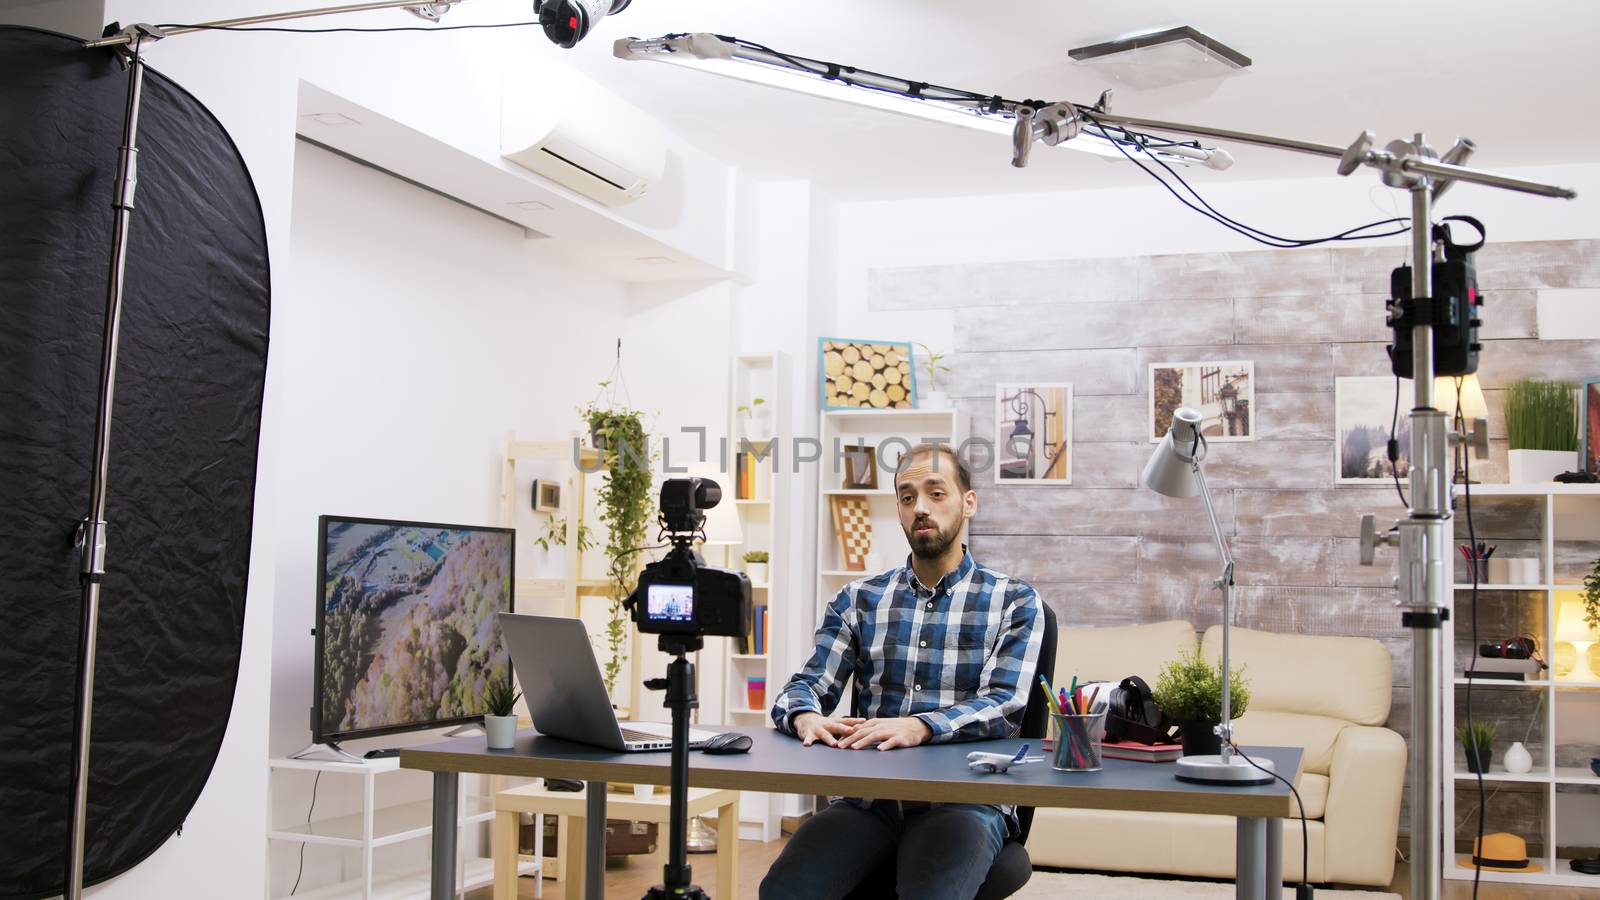 Behind the scenes of young vlogger using modern technology by DCStudio